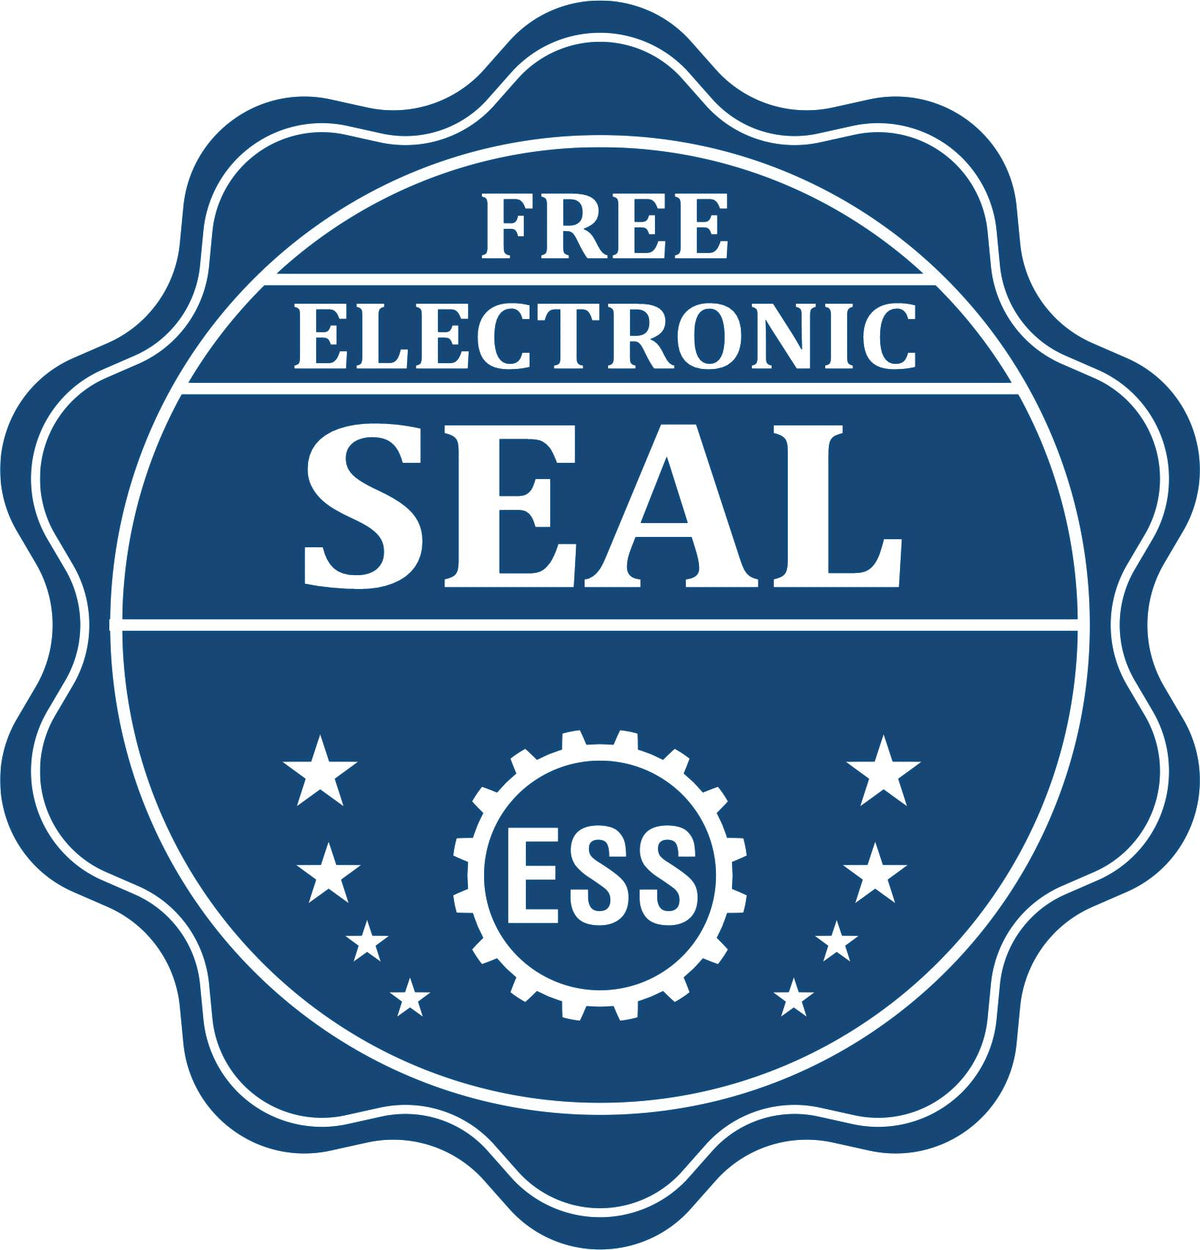 A badge showing a free electronic seal for the New York Desk Architect Embossing Seal with stars and the ESS gear on the emblem.